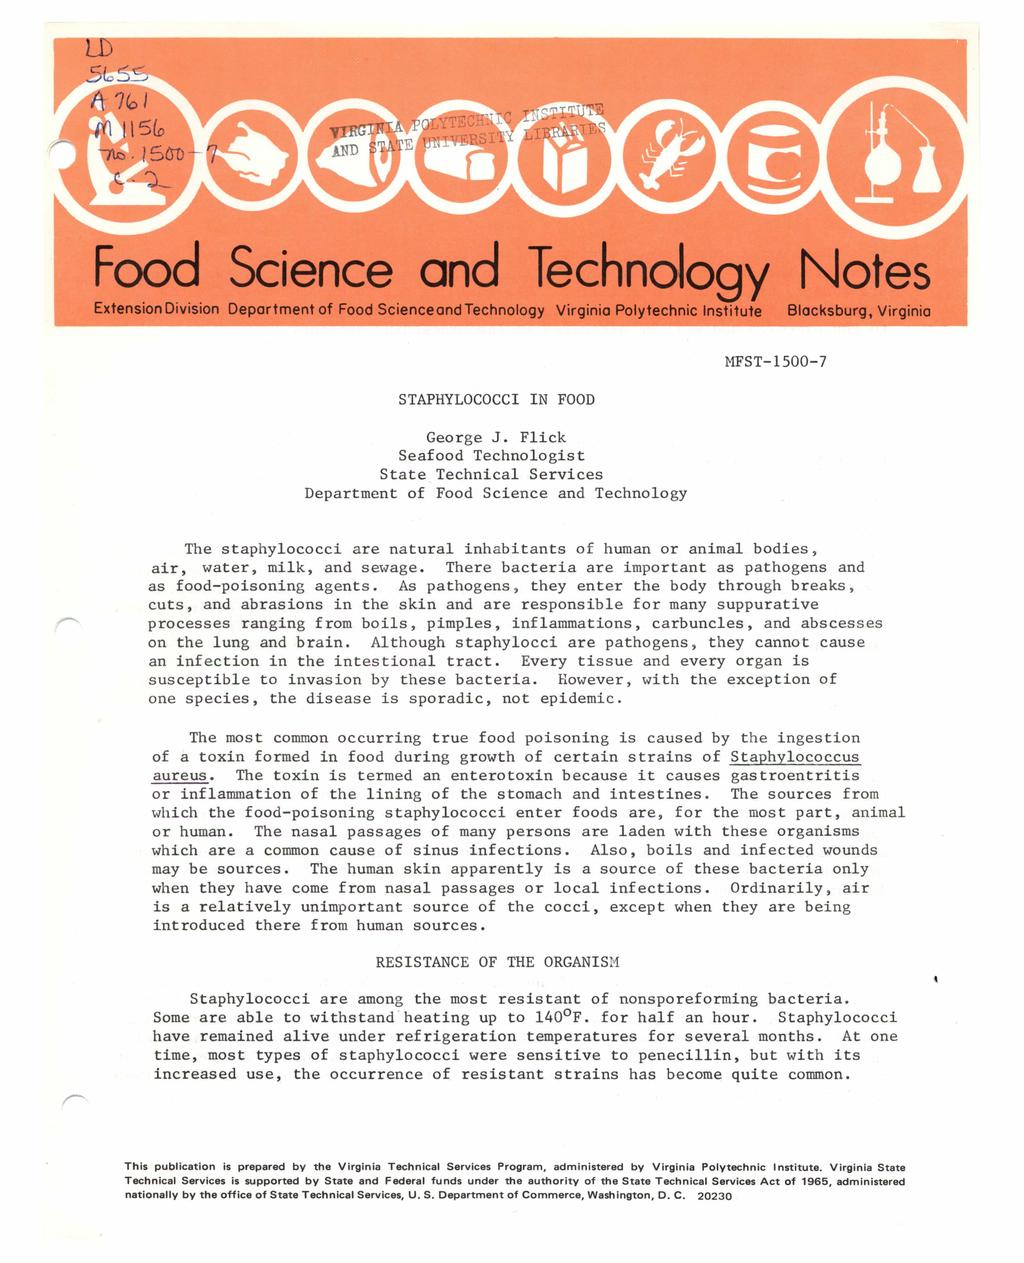 Food Science and Technology Notes Extension Division Deportment of Food Science and Technology Virginia Polytechnic Institute Blacksburg, Virginia STAPHYLOCOCCI IN FOOD George J.